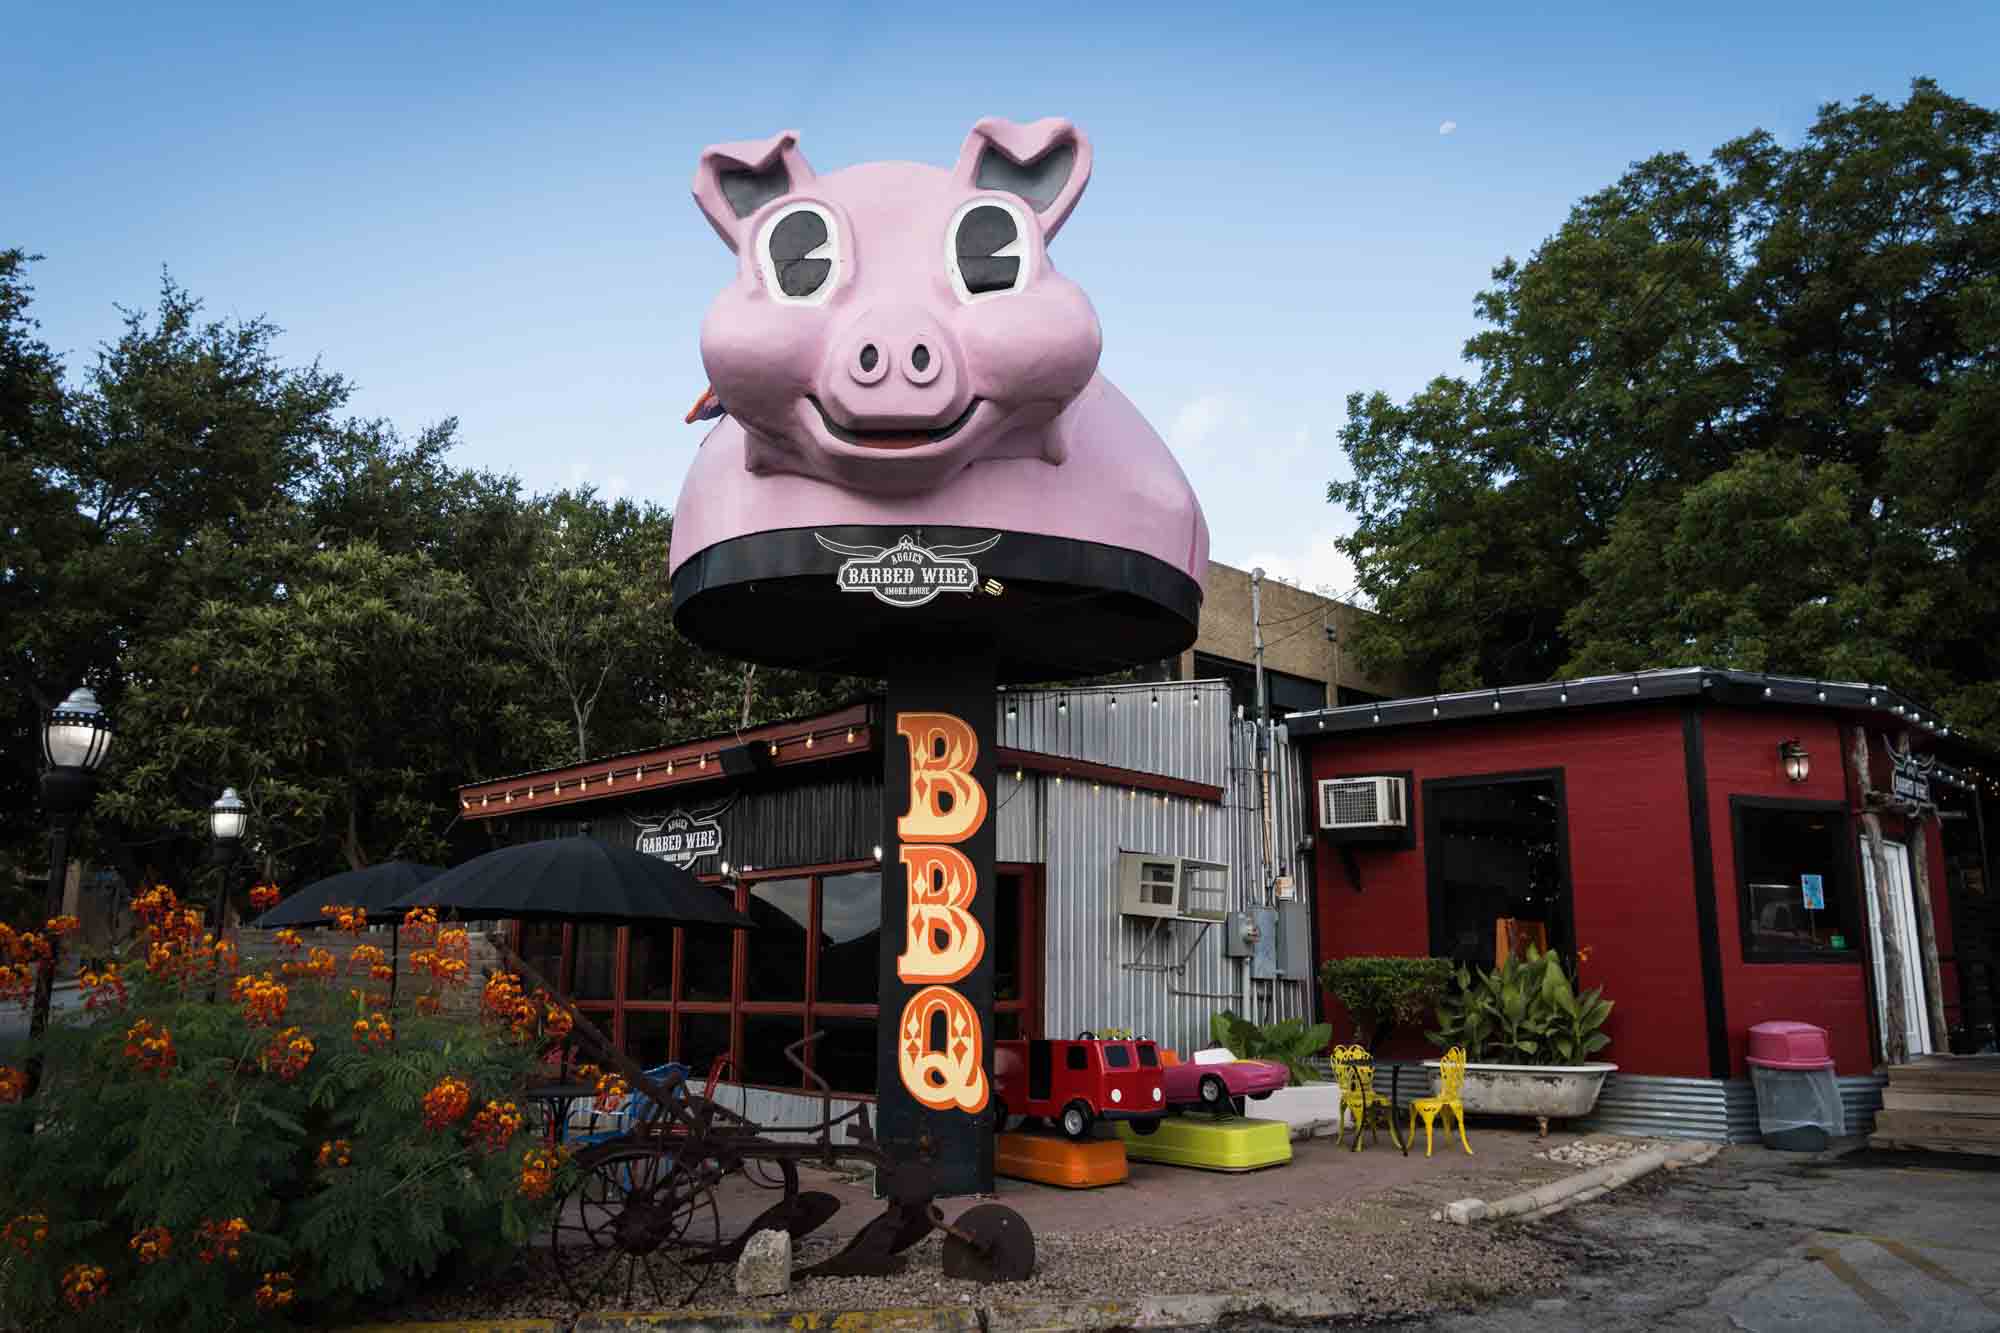 BBQ restaurant featuring large pink pig on the roof in San Antonio